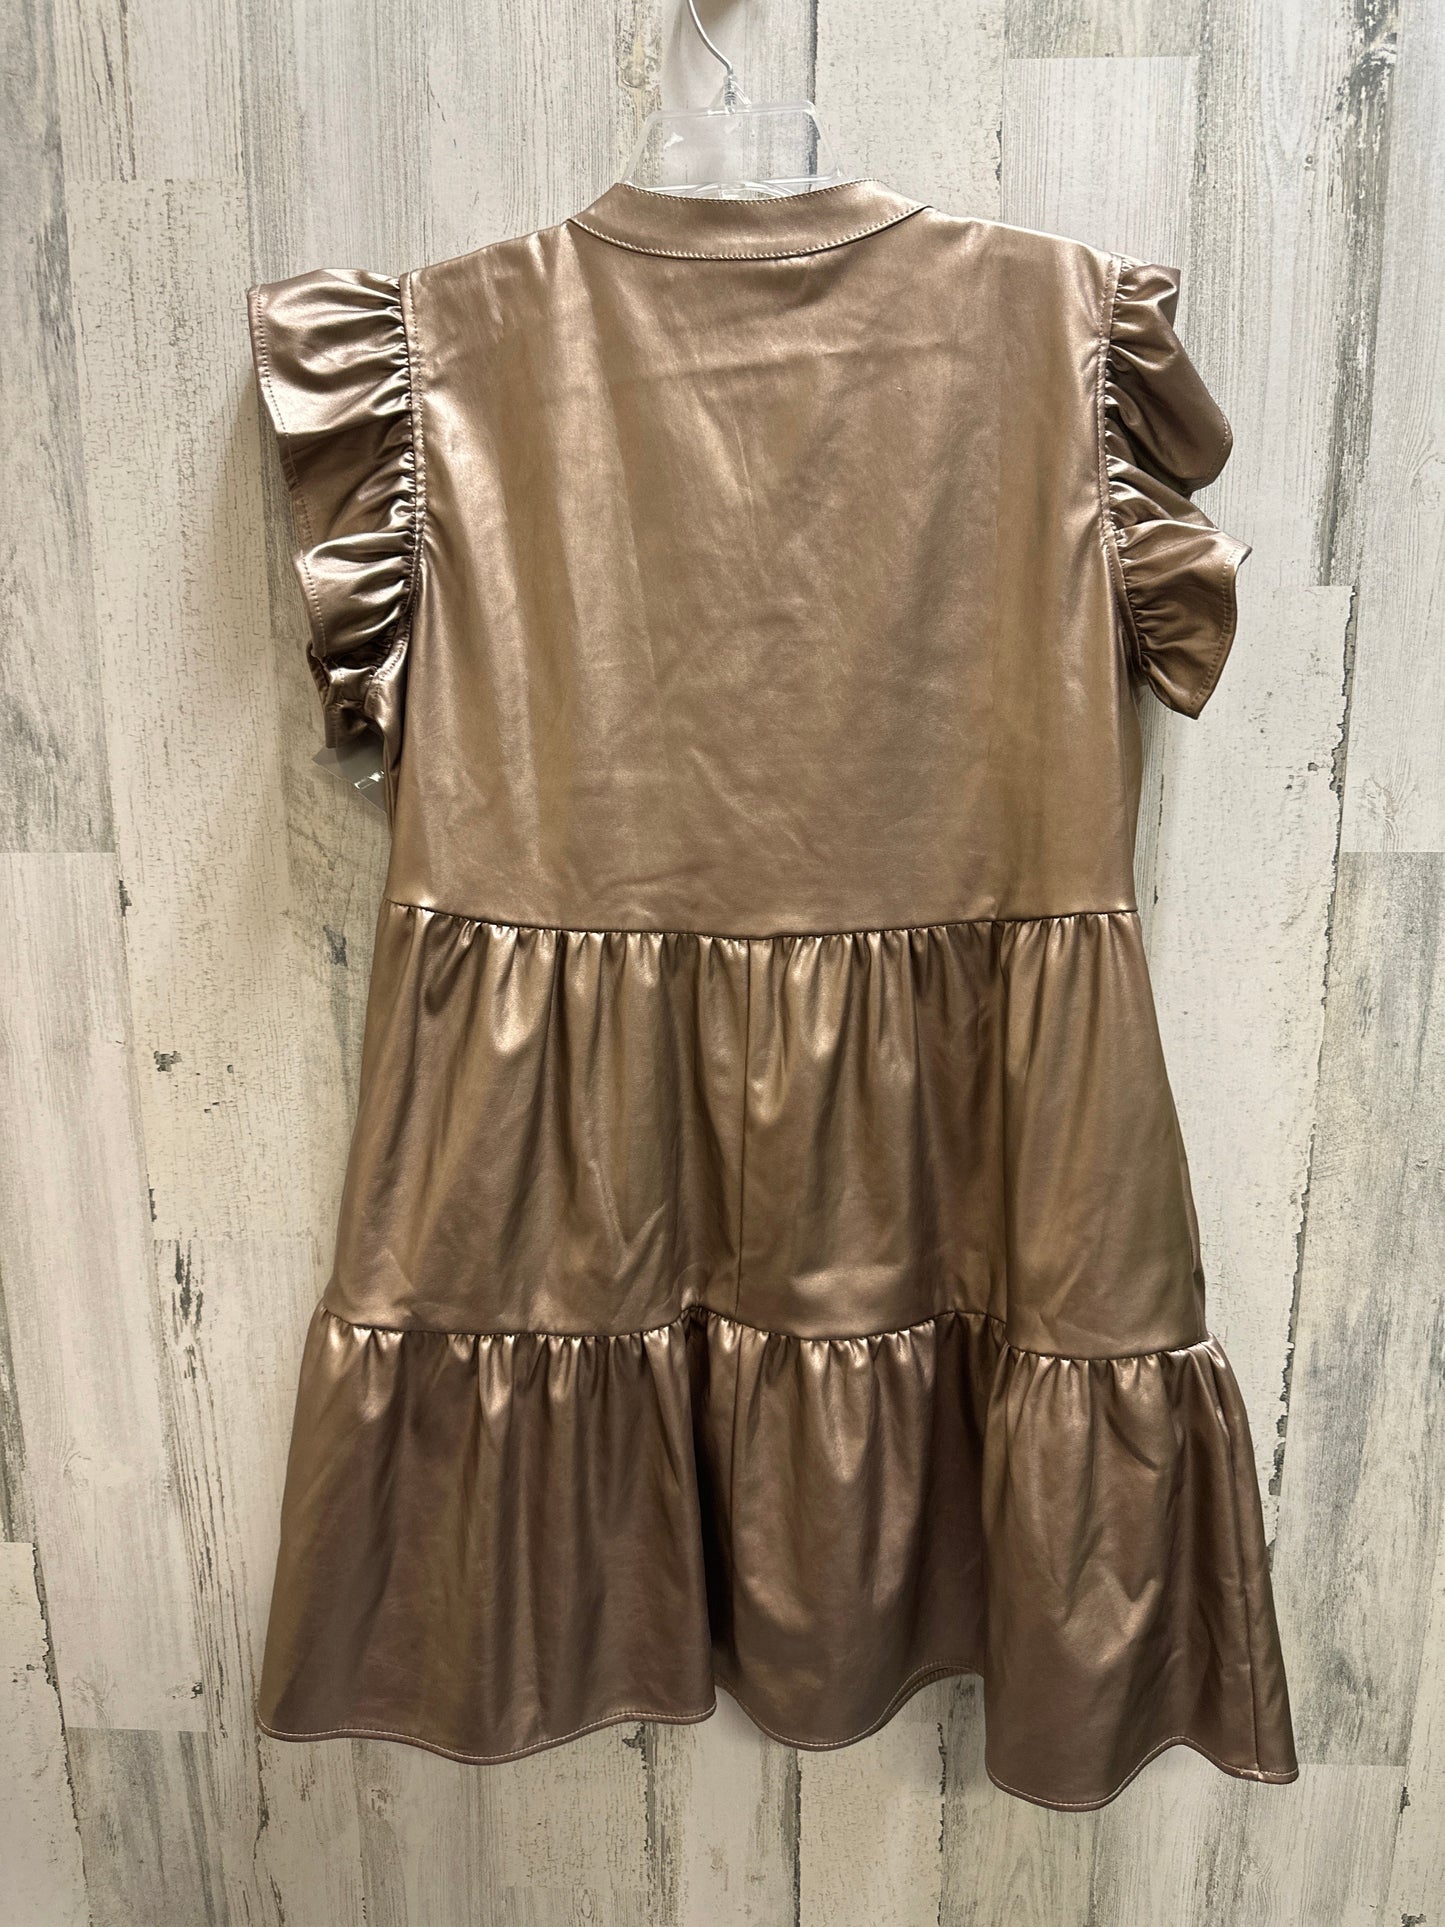 Rose Gold Dress Casual Short Entro, Size M